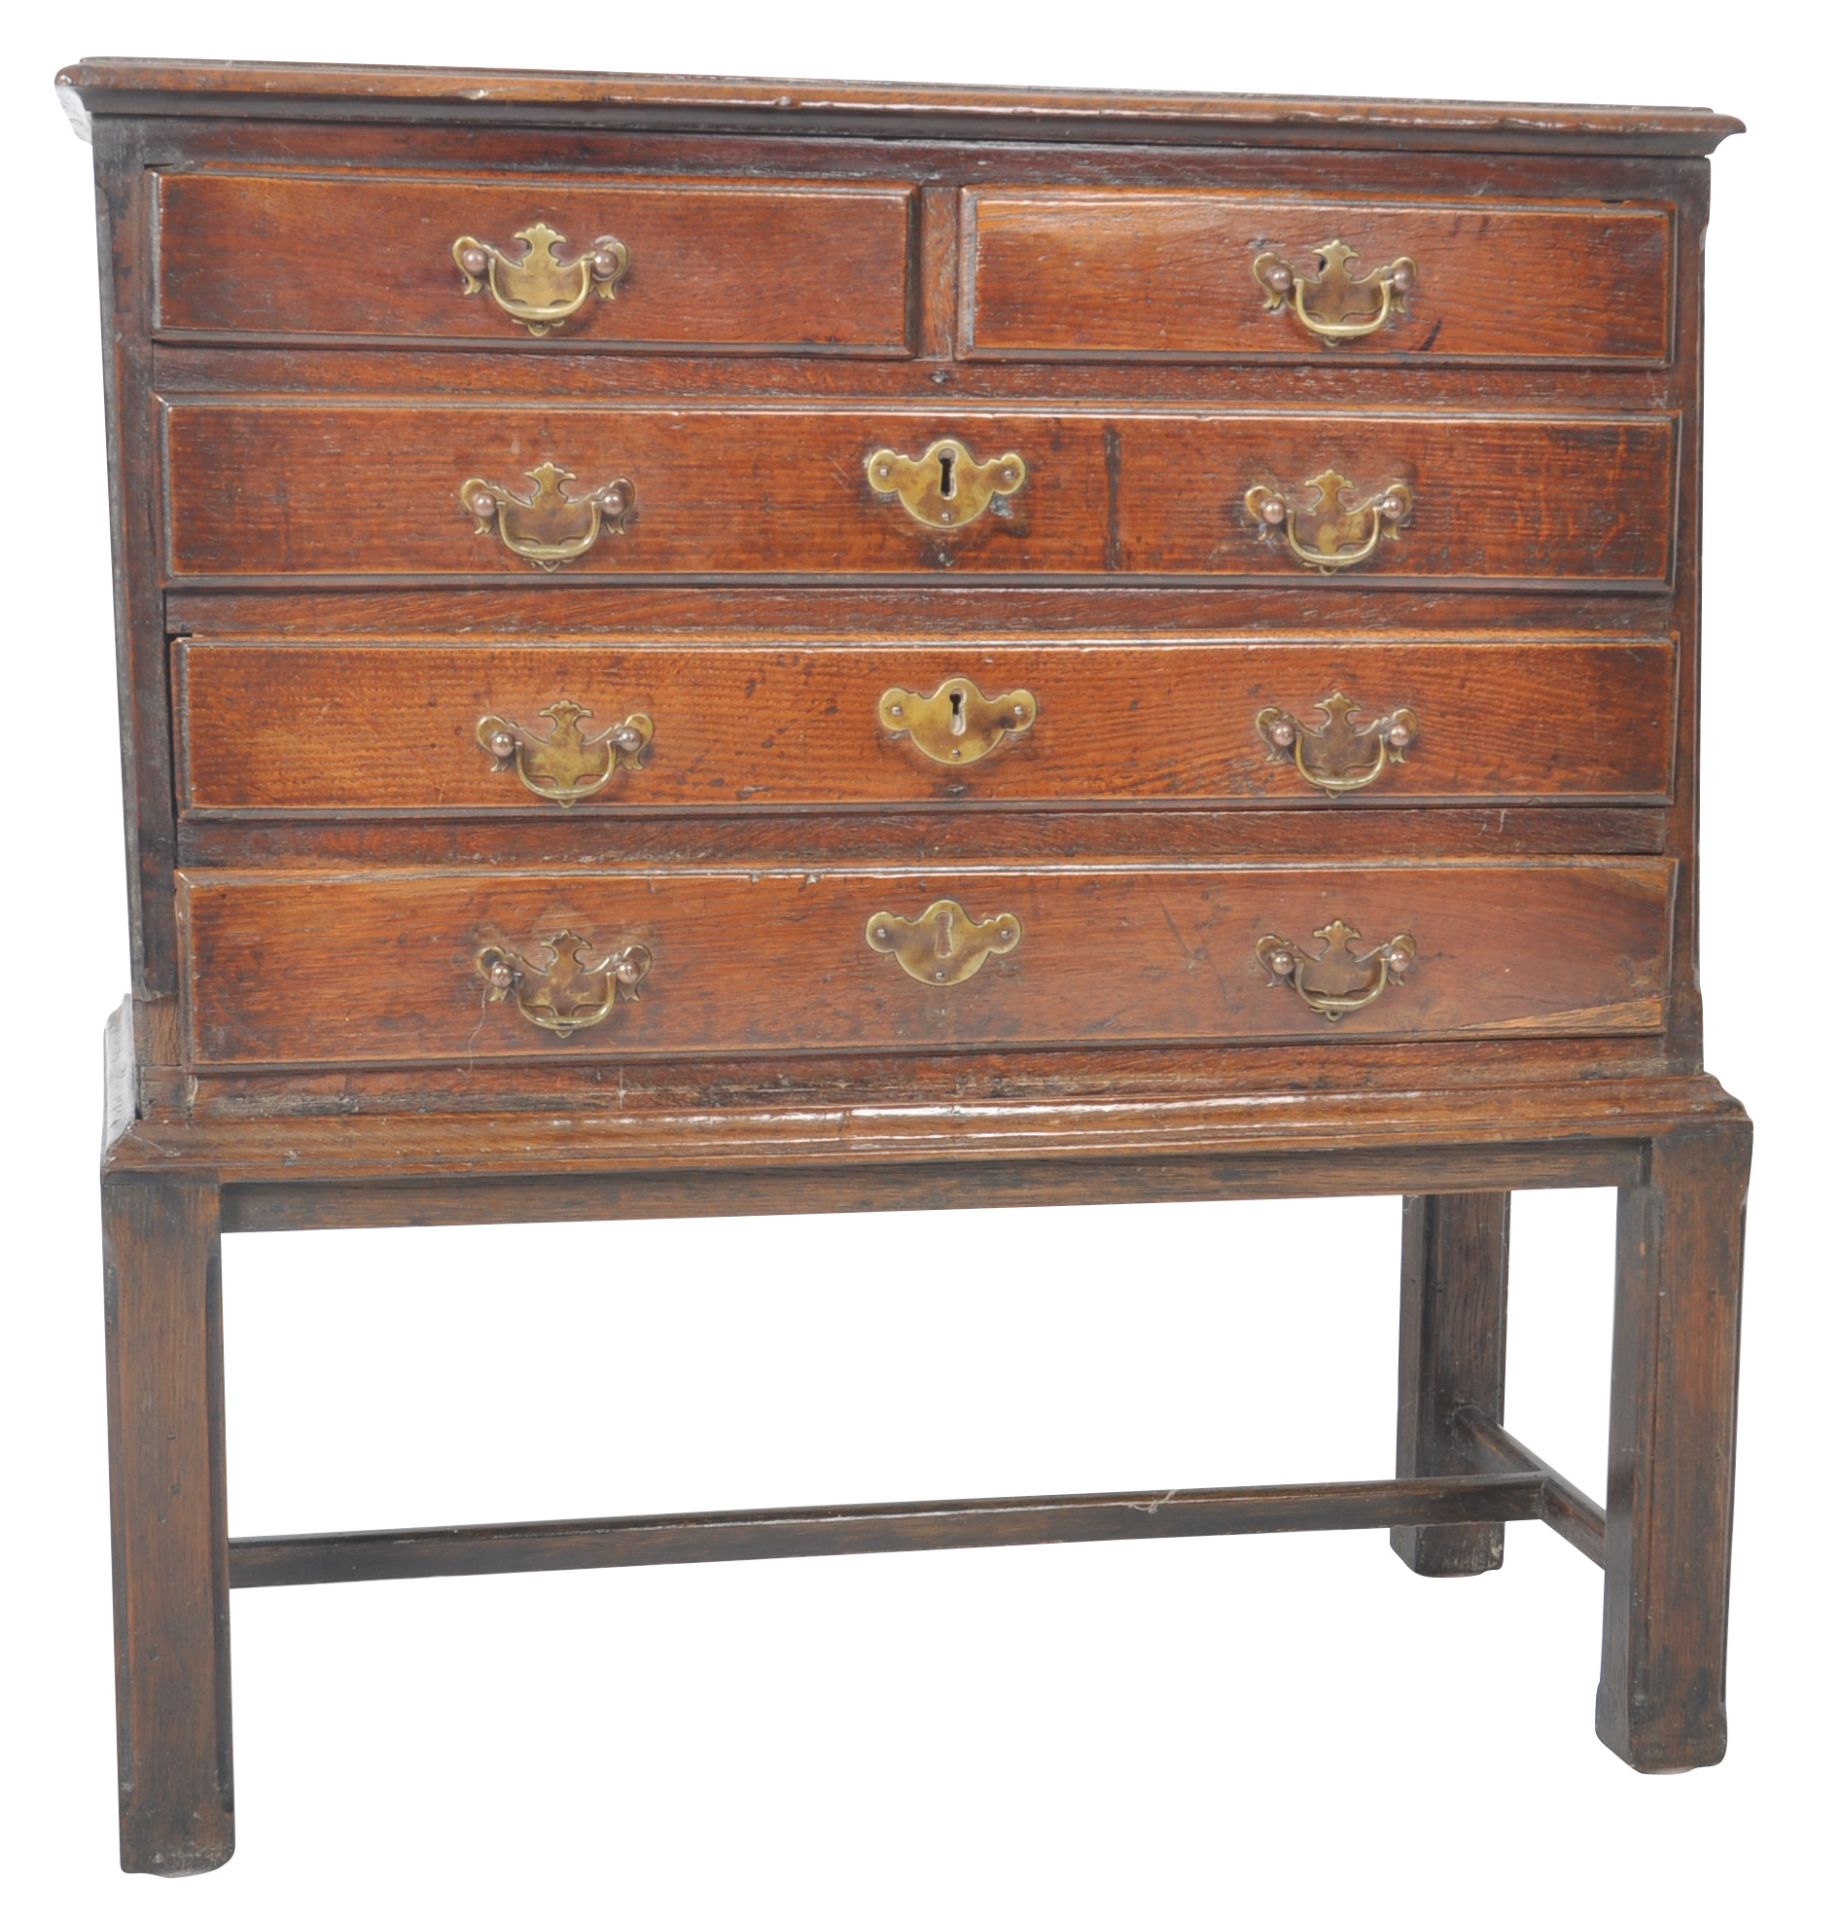 RARE 18TH CENTURY MINIATURE CHEST ON STAND